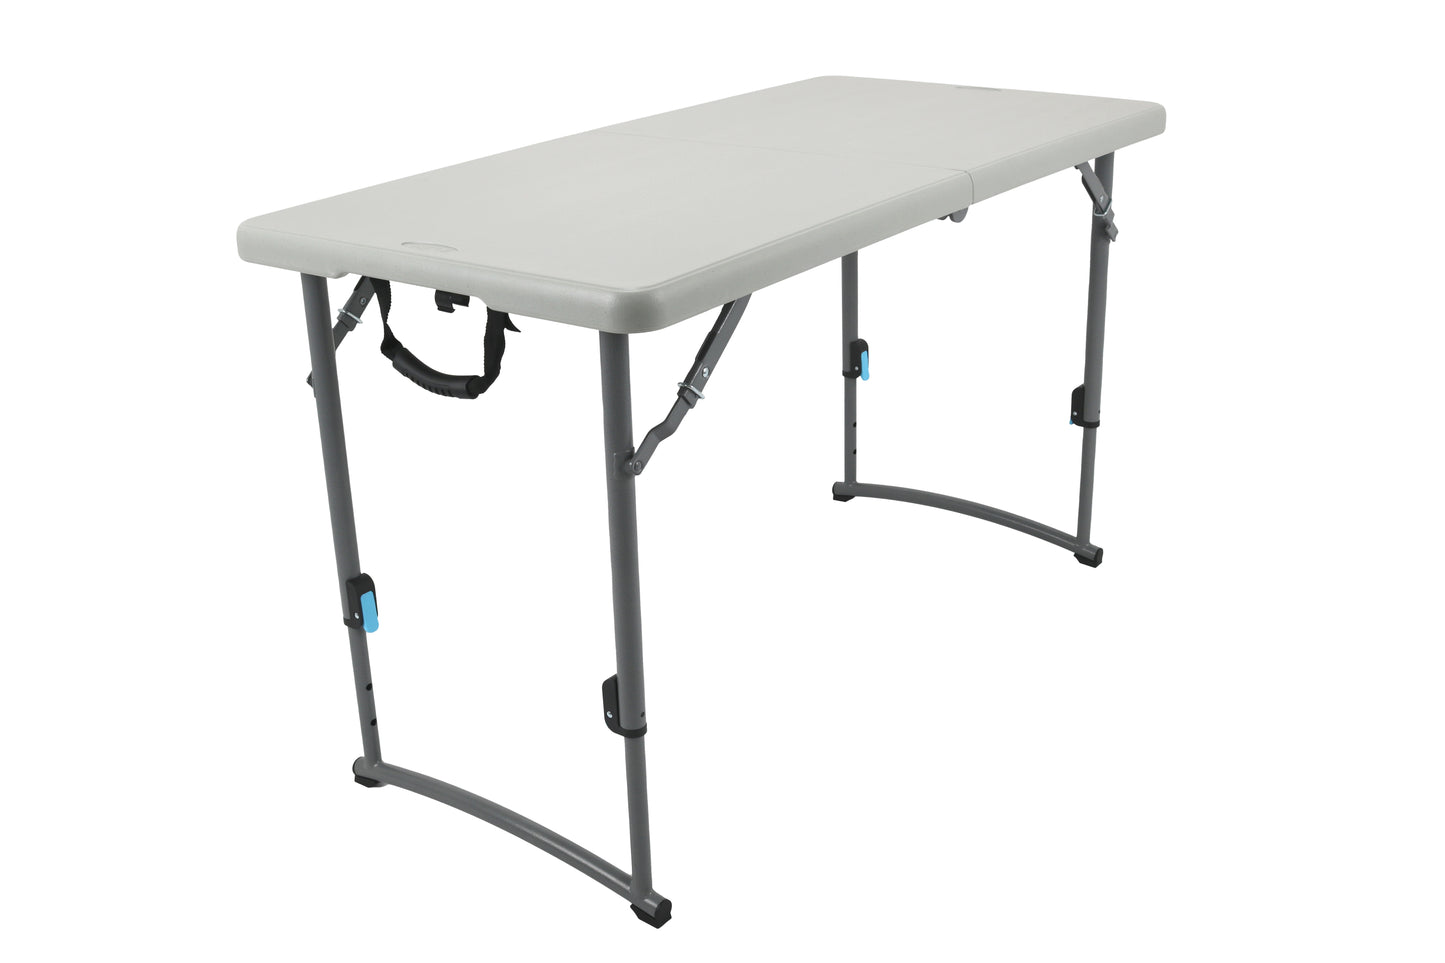 NPS Rectangular Fold-In-Half Adjustable Height Plastic Picnic Table 24" W x 48" L x 22"-35" H (BFHT-2448A)